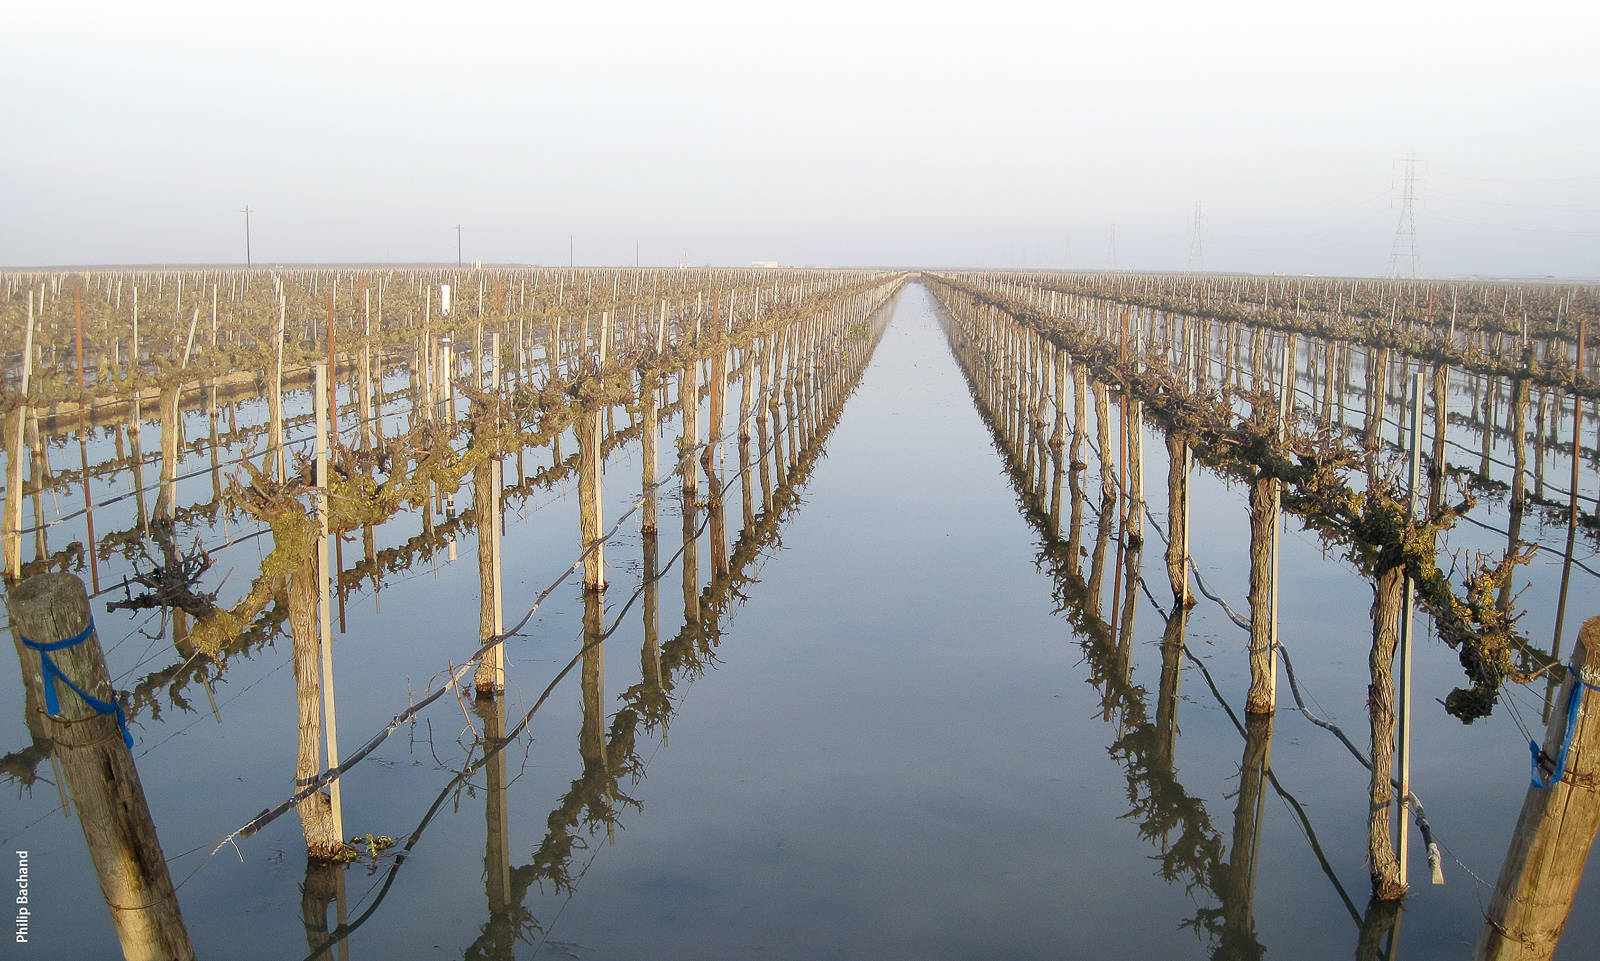 Irrigation districts and water agencies are considering on-farm flood capture as a tool for increasing groundwater resources and managing increasingly variable precipitation due to climate change.